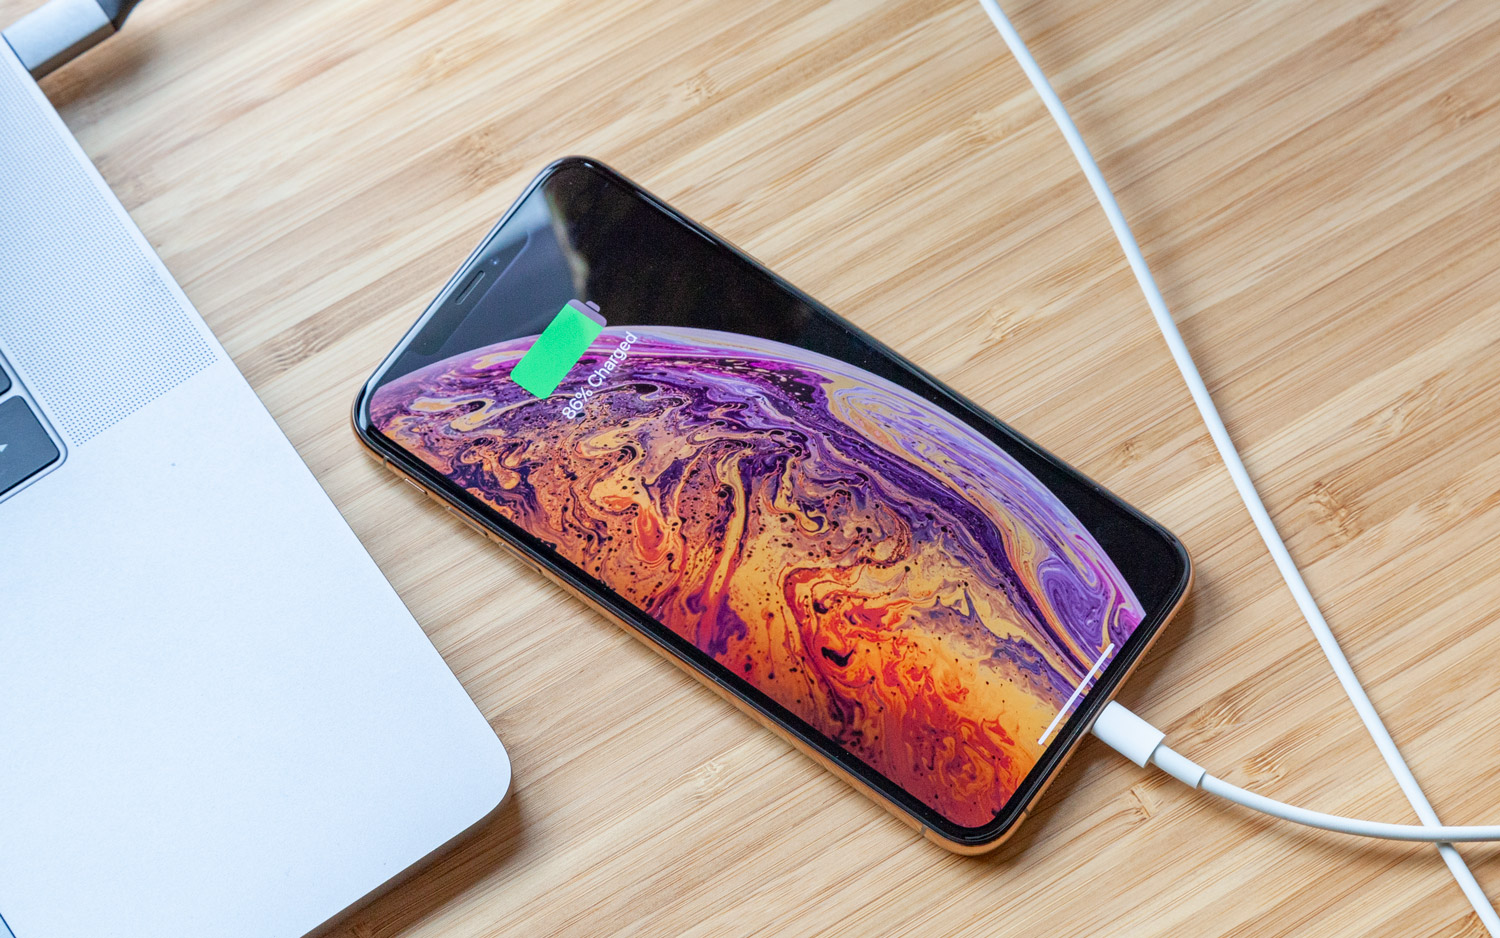 Apple iPhone XS and XS Max went through a battery life test with average results